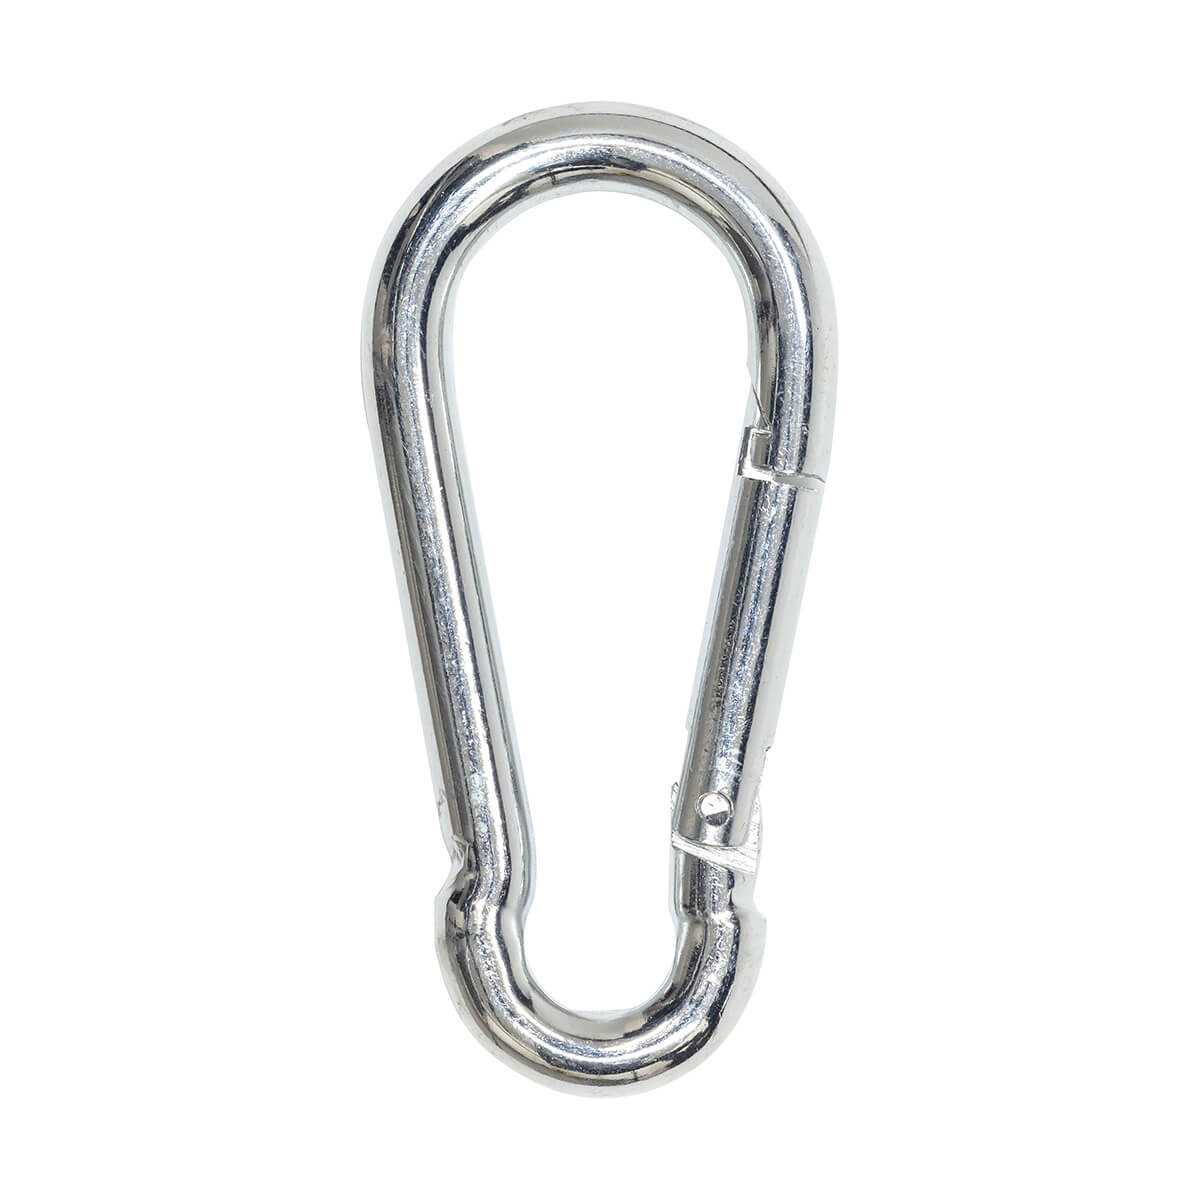 Galvanized Security Snap - 4-in